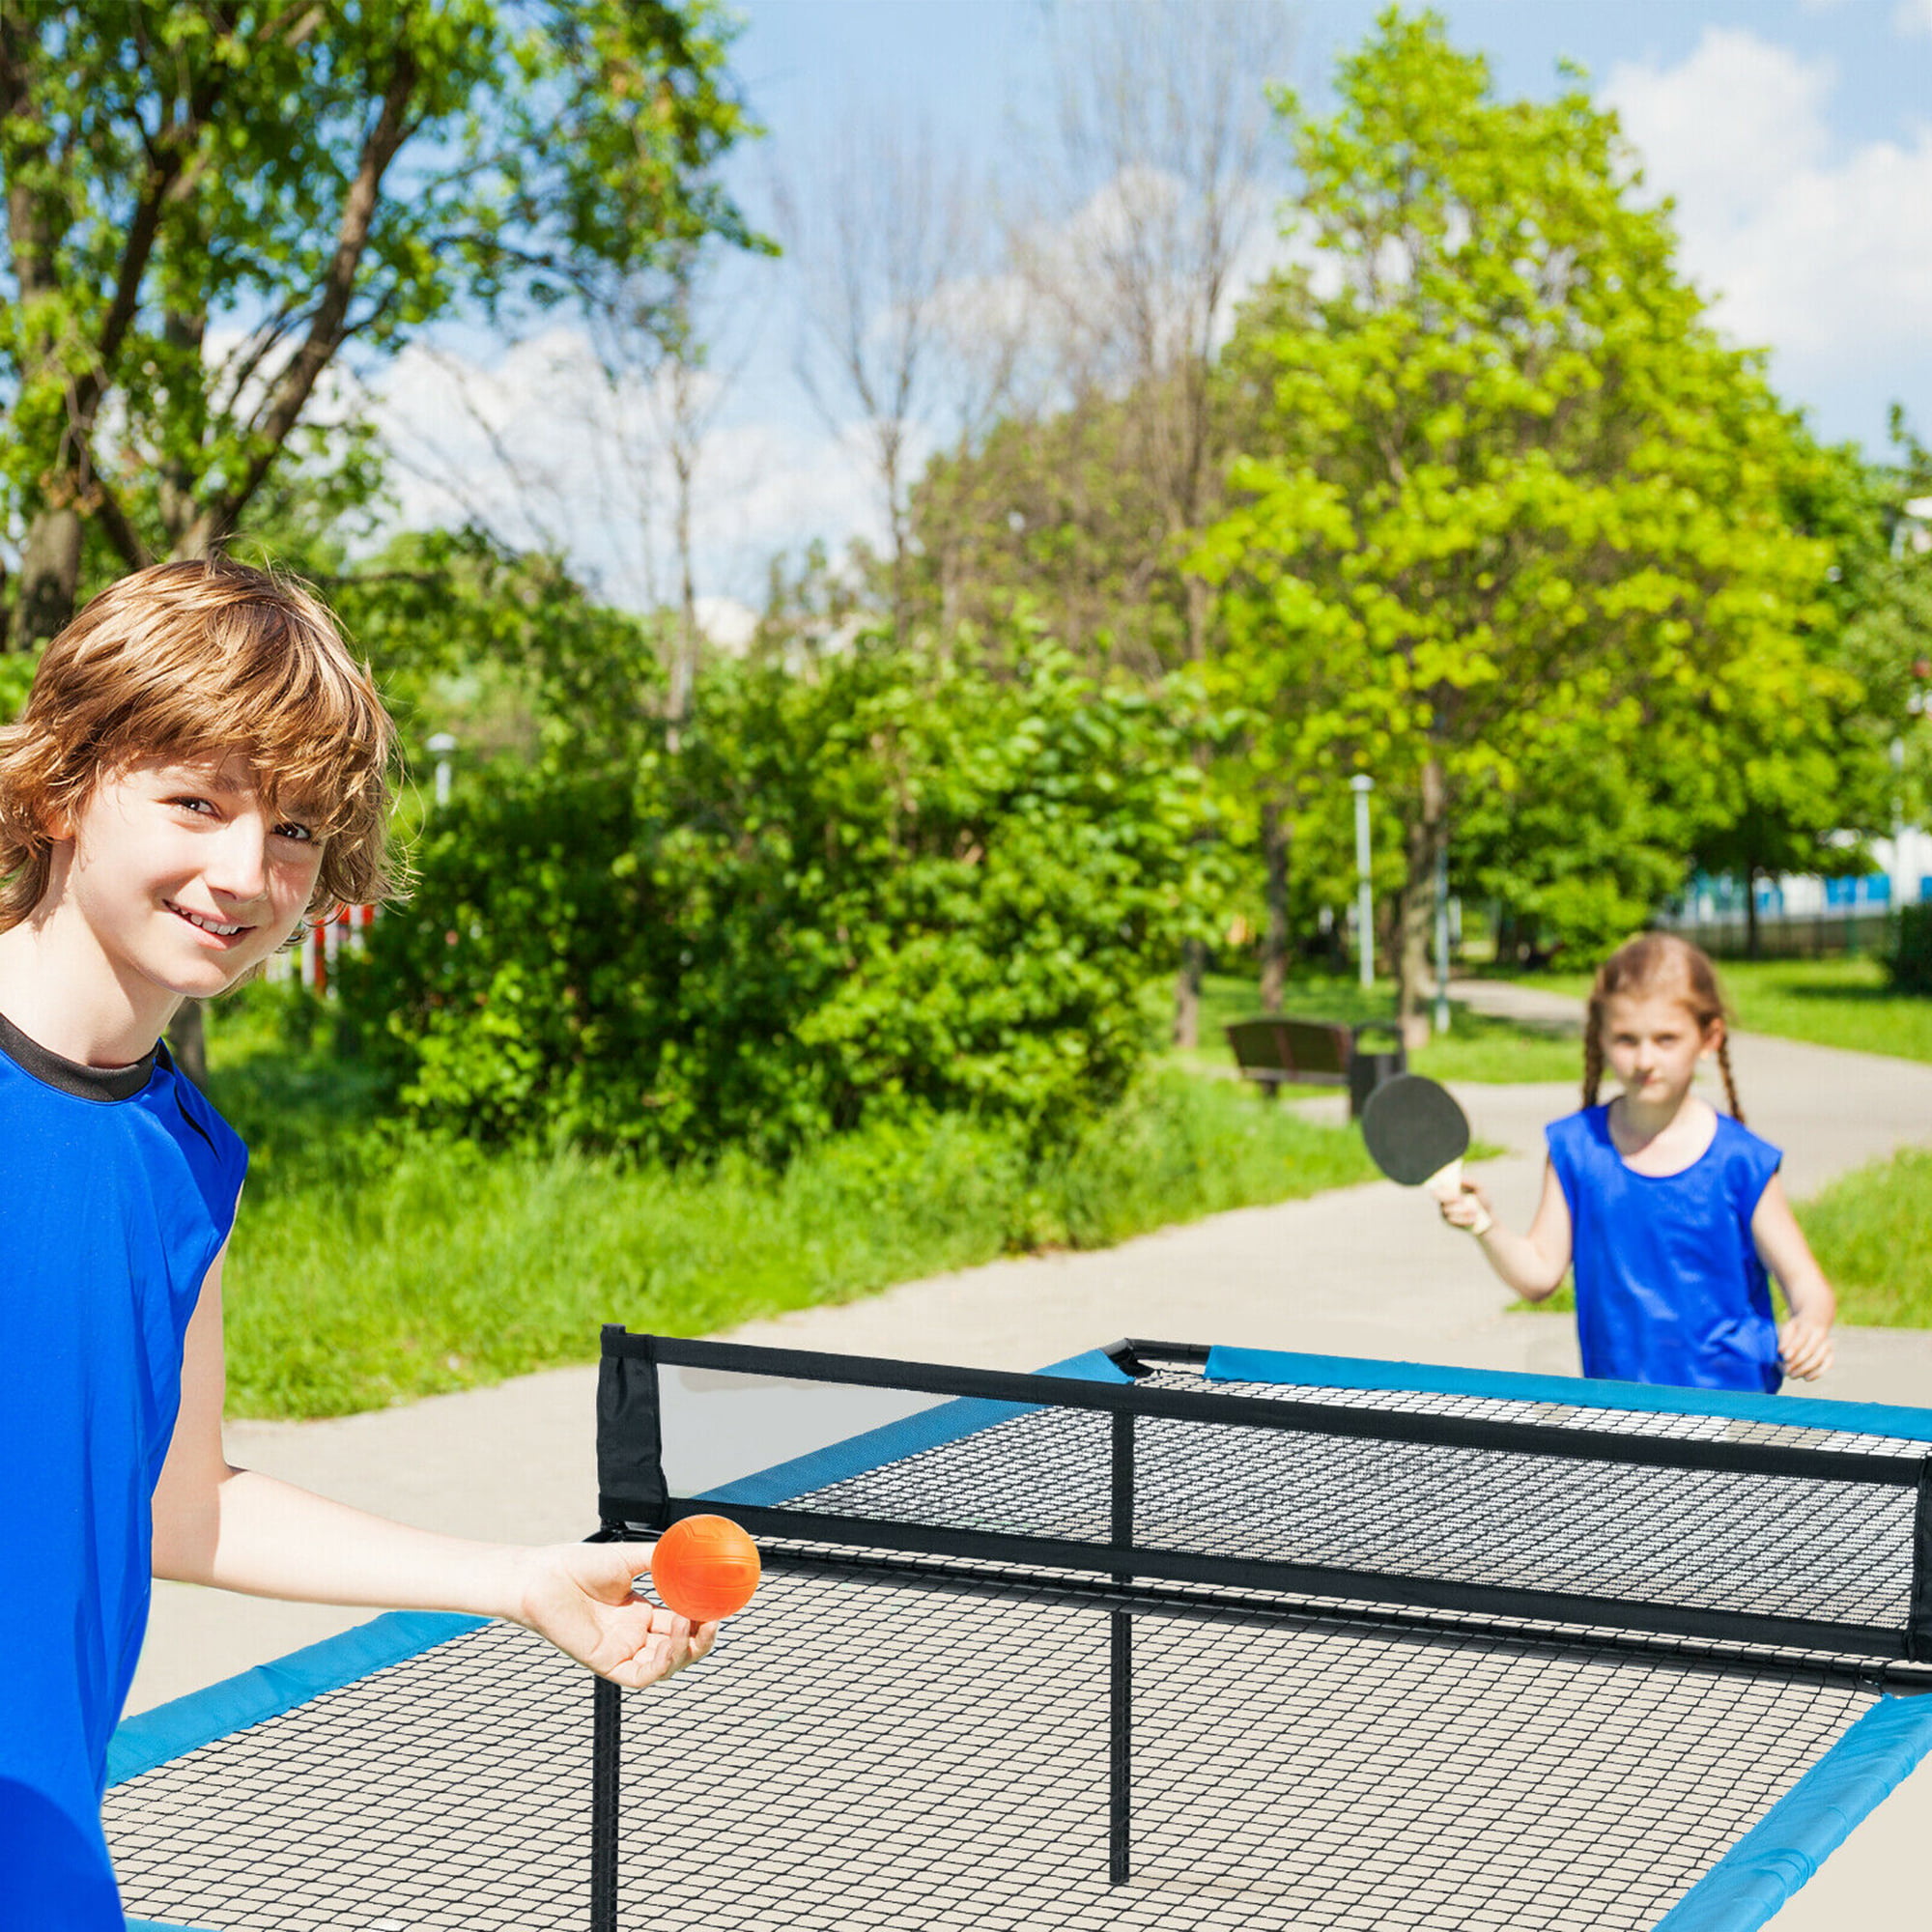  Laser Sports Table Tennis Set - Family Indoor and Outdoor  Recreation Sports Play - Easy to Install Retractable Net Post - Fun Ping  Pong Set Accessories for Kids and Adults 